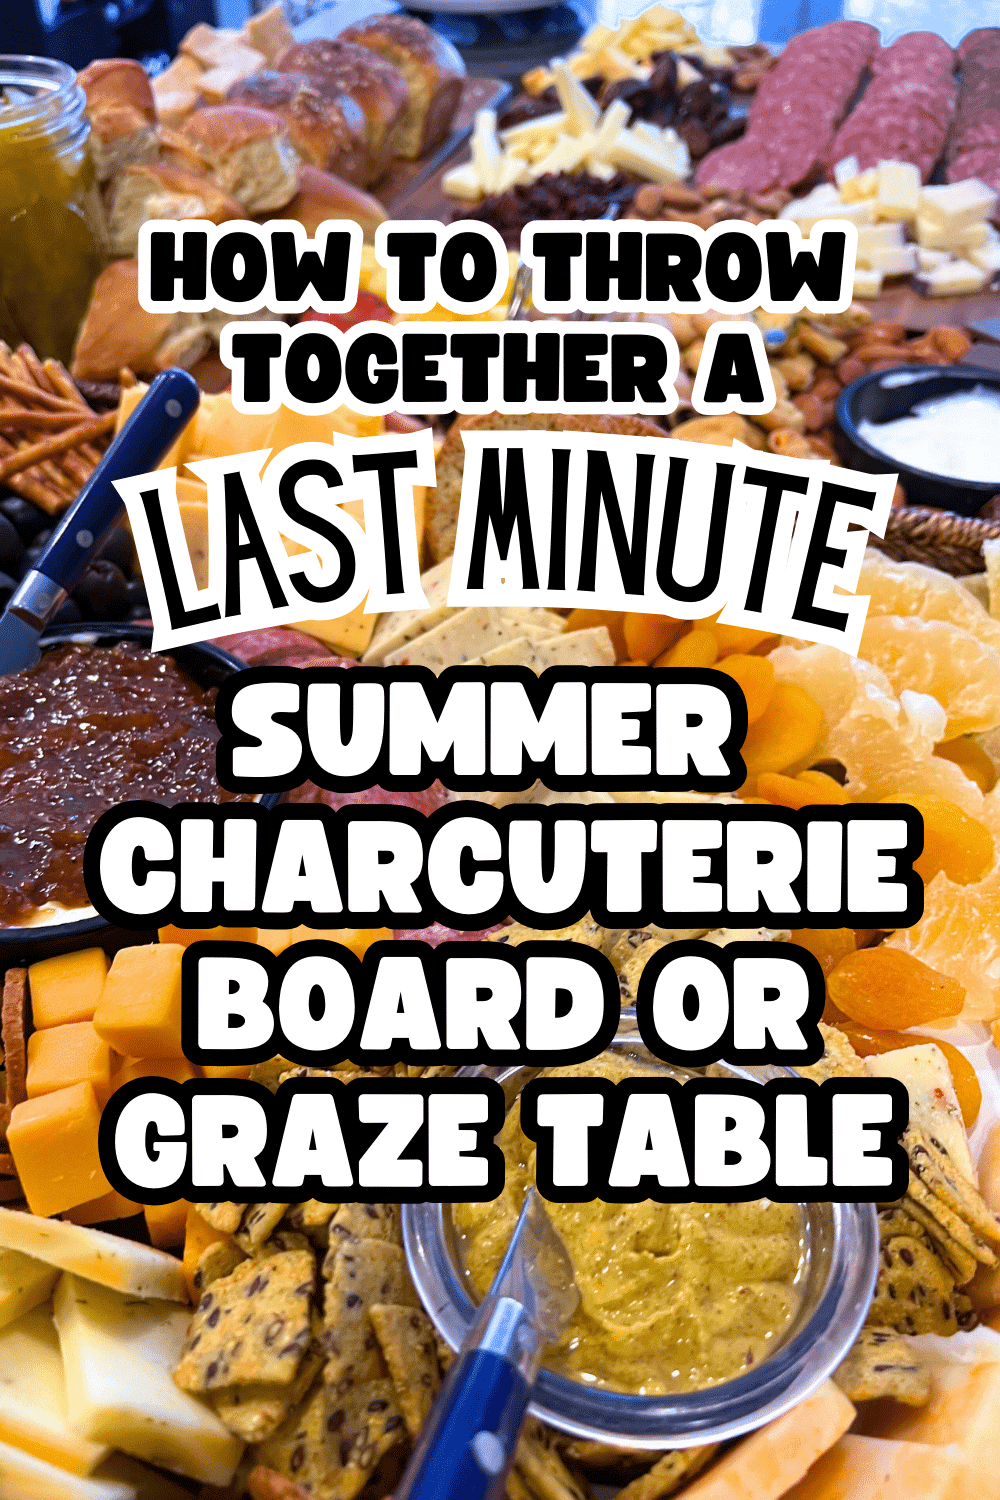 Easy Party Charcuterie Board Ideas Or Graze Table For Summer BBQ party or Other Parties - text over image of homemade party platter